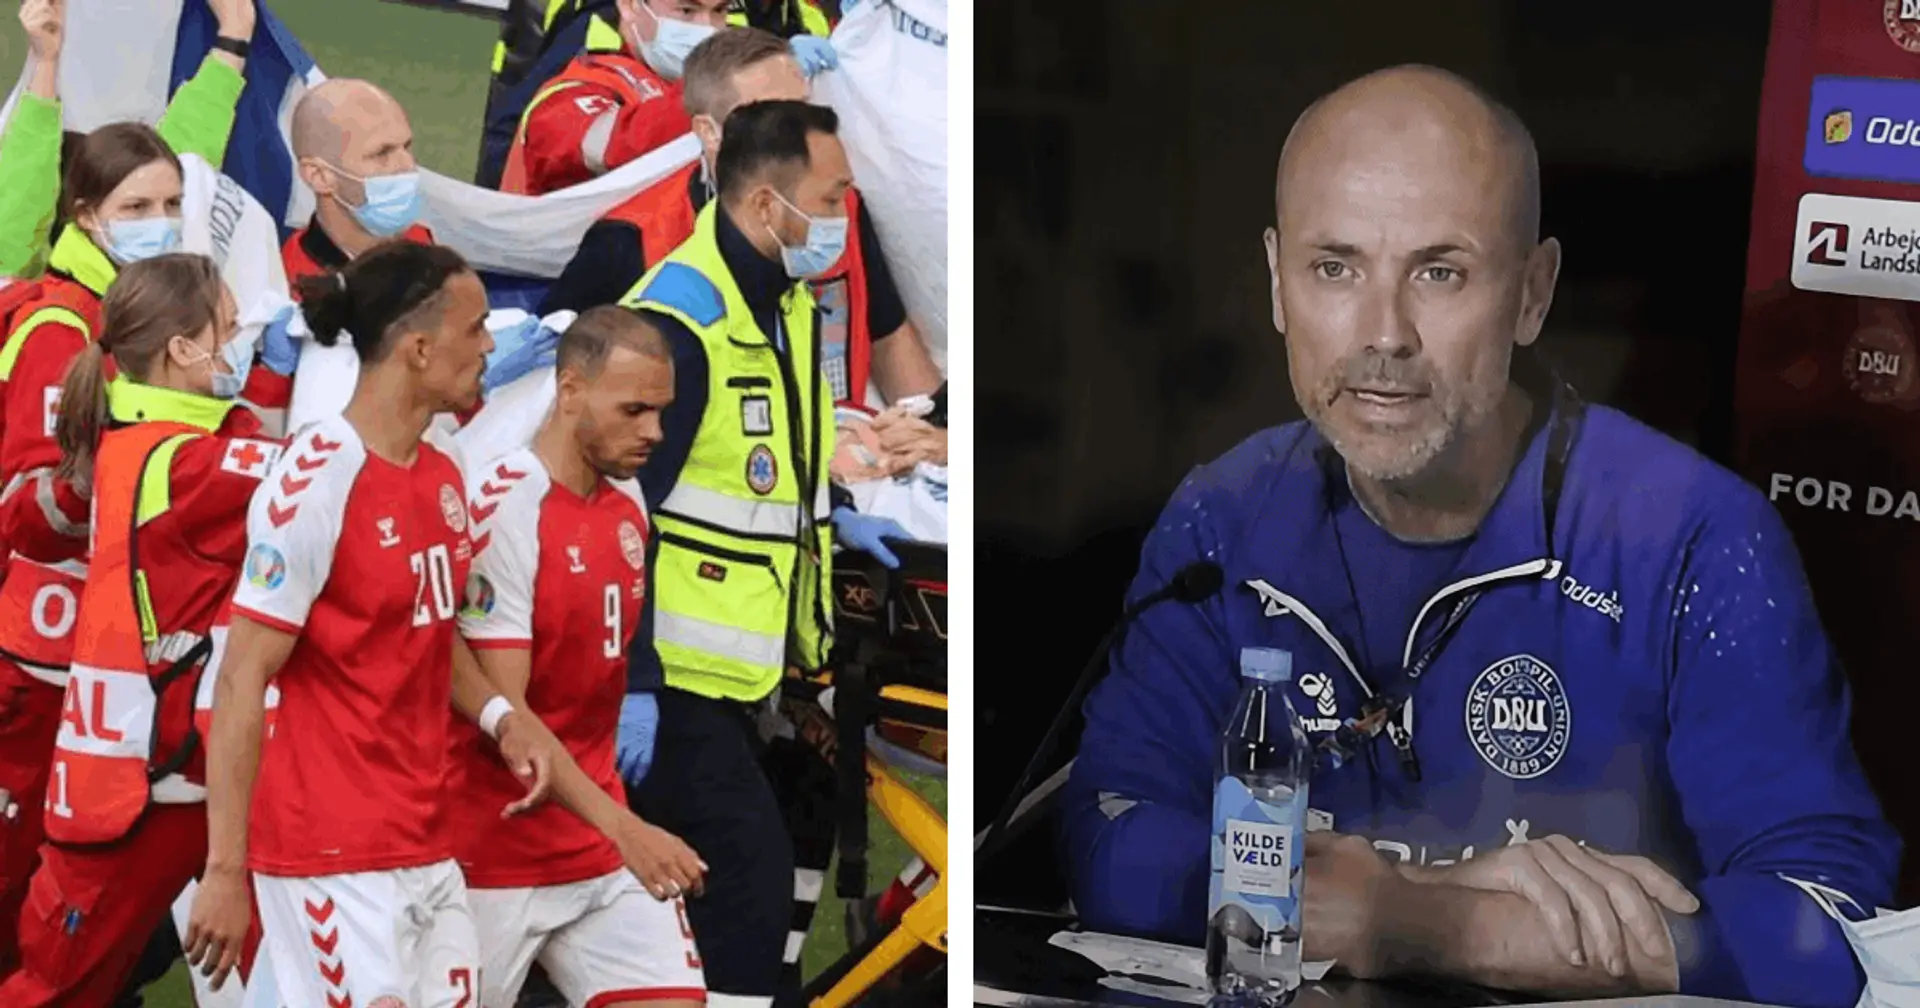 ‘He was gone. But we got him back’: Denmark’s team doctor on how they saved Christian Eriksen's life